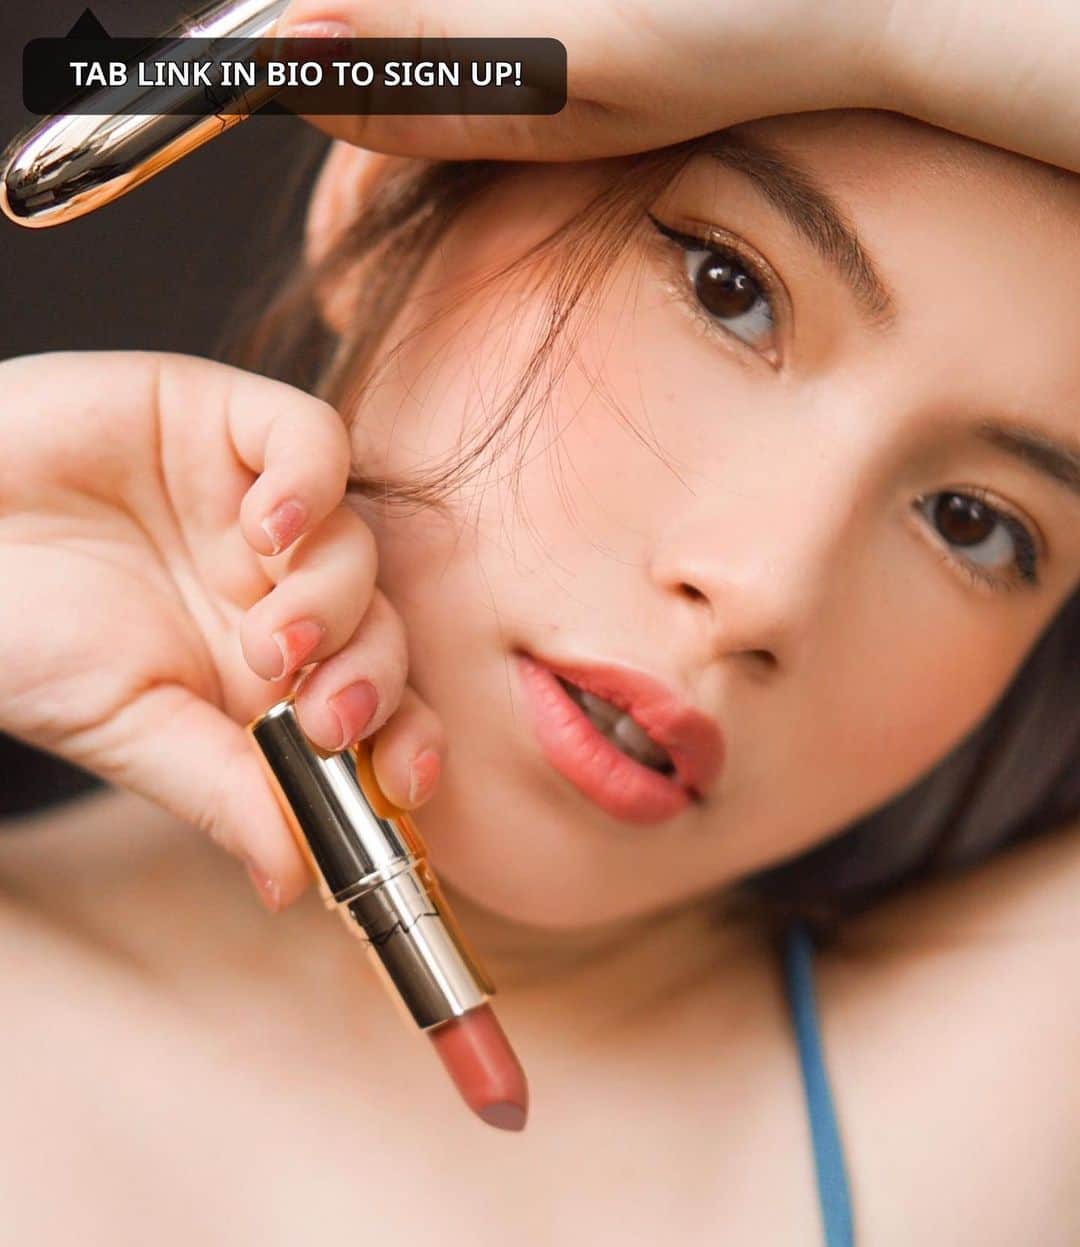 M·A·C Cosmetics Hong Kongさんのインスタグラム写真 - (M·A·C Cosmetics Hong KongInstagram)「粉嫩甜度恰到好處！💝 M·A·C MAKER #金管子彈唇膏 @THEMAYAAHMAD 係今季必備嘅自然#MLBB 唇色！ 大熱焦糖豆沙，一抹活潑溫柔，今個夏日最值得入手🔥 立即到Bio 連結登記，獨家知道 𝙋𝙍𝙊𝙅𝙀𝘾𝙏 𝙓 開售資訊，解開全新美妝體驗嘅神秘密碼！ Product mentioned: M·A·C PROJECT X Vol.001 [Cult of Lips] - HK$450 #MACProjectX #7月哄動開箱 #MACHongKong Regram from @jenni.ferfer   You can never go wrong with this shade 💝 M·A·C MAKER @THEMAYAAHMAD is the natural #MLBB shade that you’re searching for this season! The ON-TREND caramel nude hue in creamy matte finish will become your makeup bag staple this summer.💫 Get the latest updates on 𝙋𝙍𝙊𝙅𝙀𝘾𝙏 𝙓 by registering through the link in bio NOW!」7月9日 10時01分 - maccosmeticshk